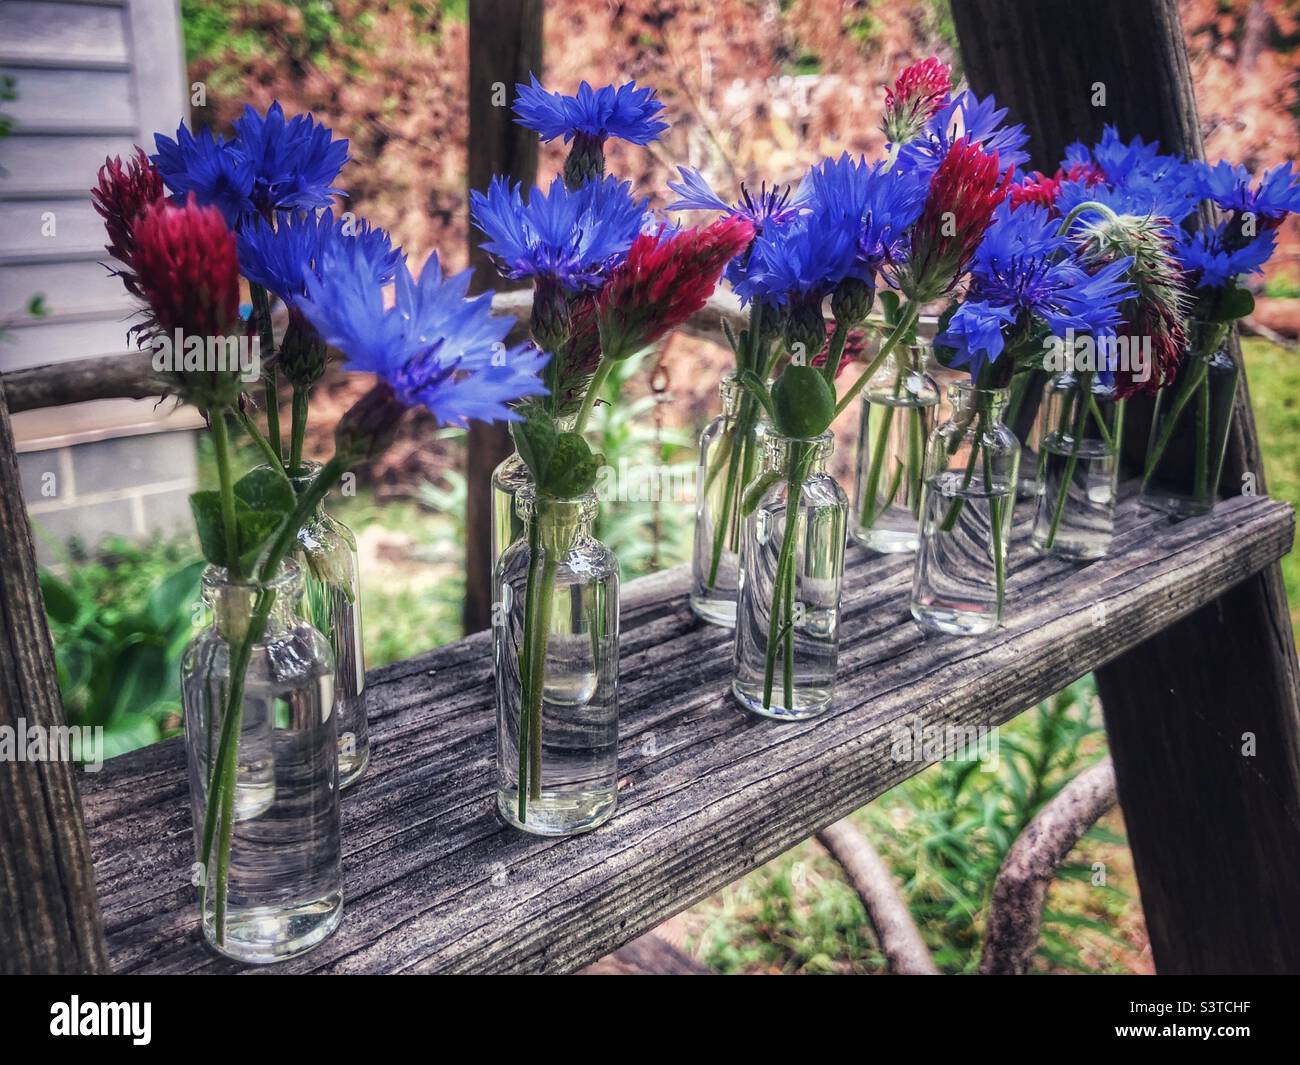 Red, white, and blue posies in tiny glass vials lined up on a ladder rung in the garden Stock Photo